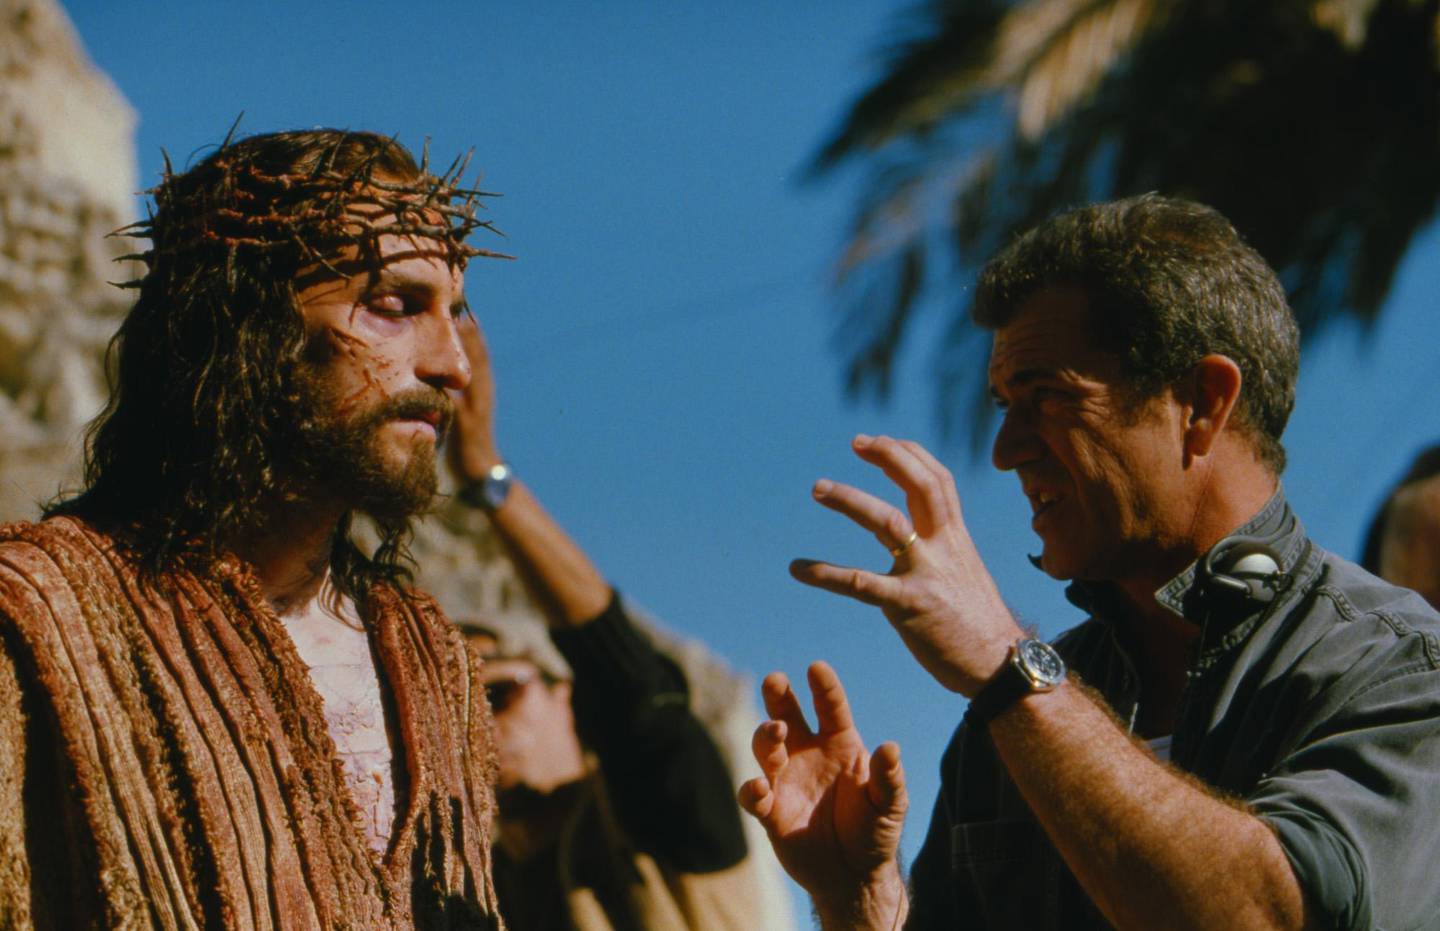 
** TO GO WITH STORY TITLED GIBSON FILM **Mel Gibson, right, directs Jim Caviezel on the set of Gibson's movie ?The Passion of The Christ,? in this undated publicity photo.The film, slated for release in February 2004, has stirred controversy over his depiction of Jews.(AP Photo)